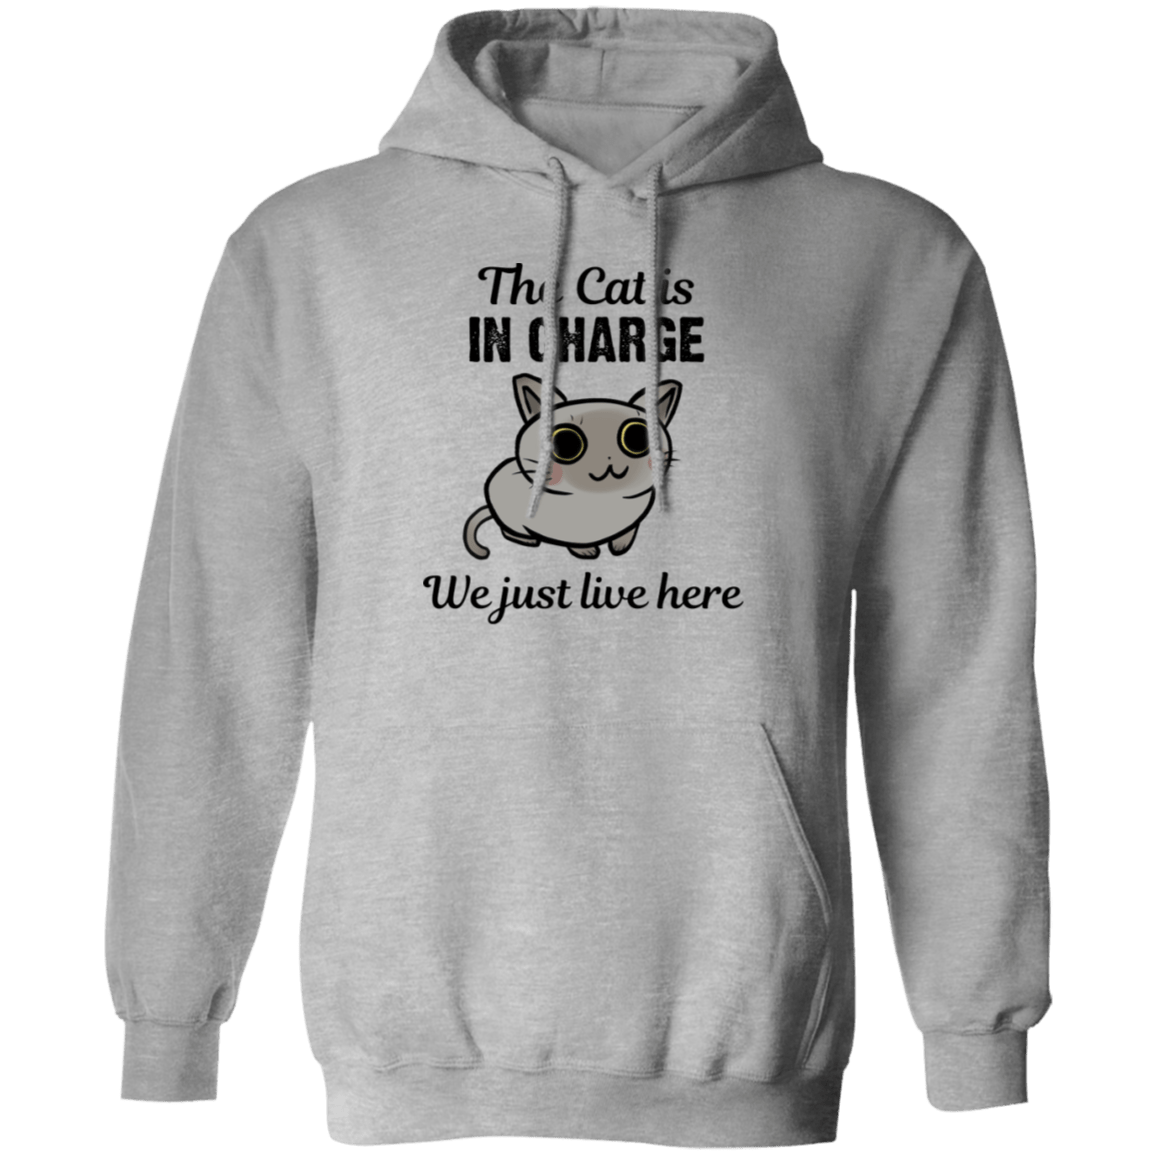 The Cat is in Charge - Hoodie.